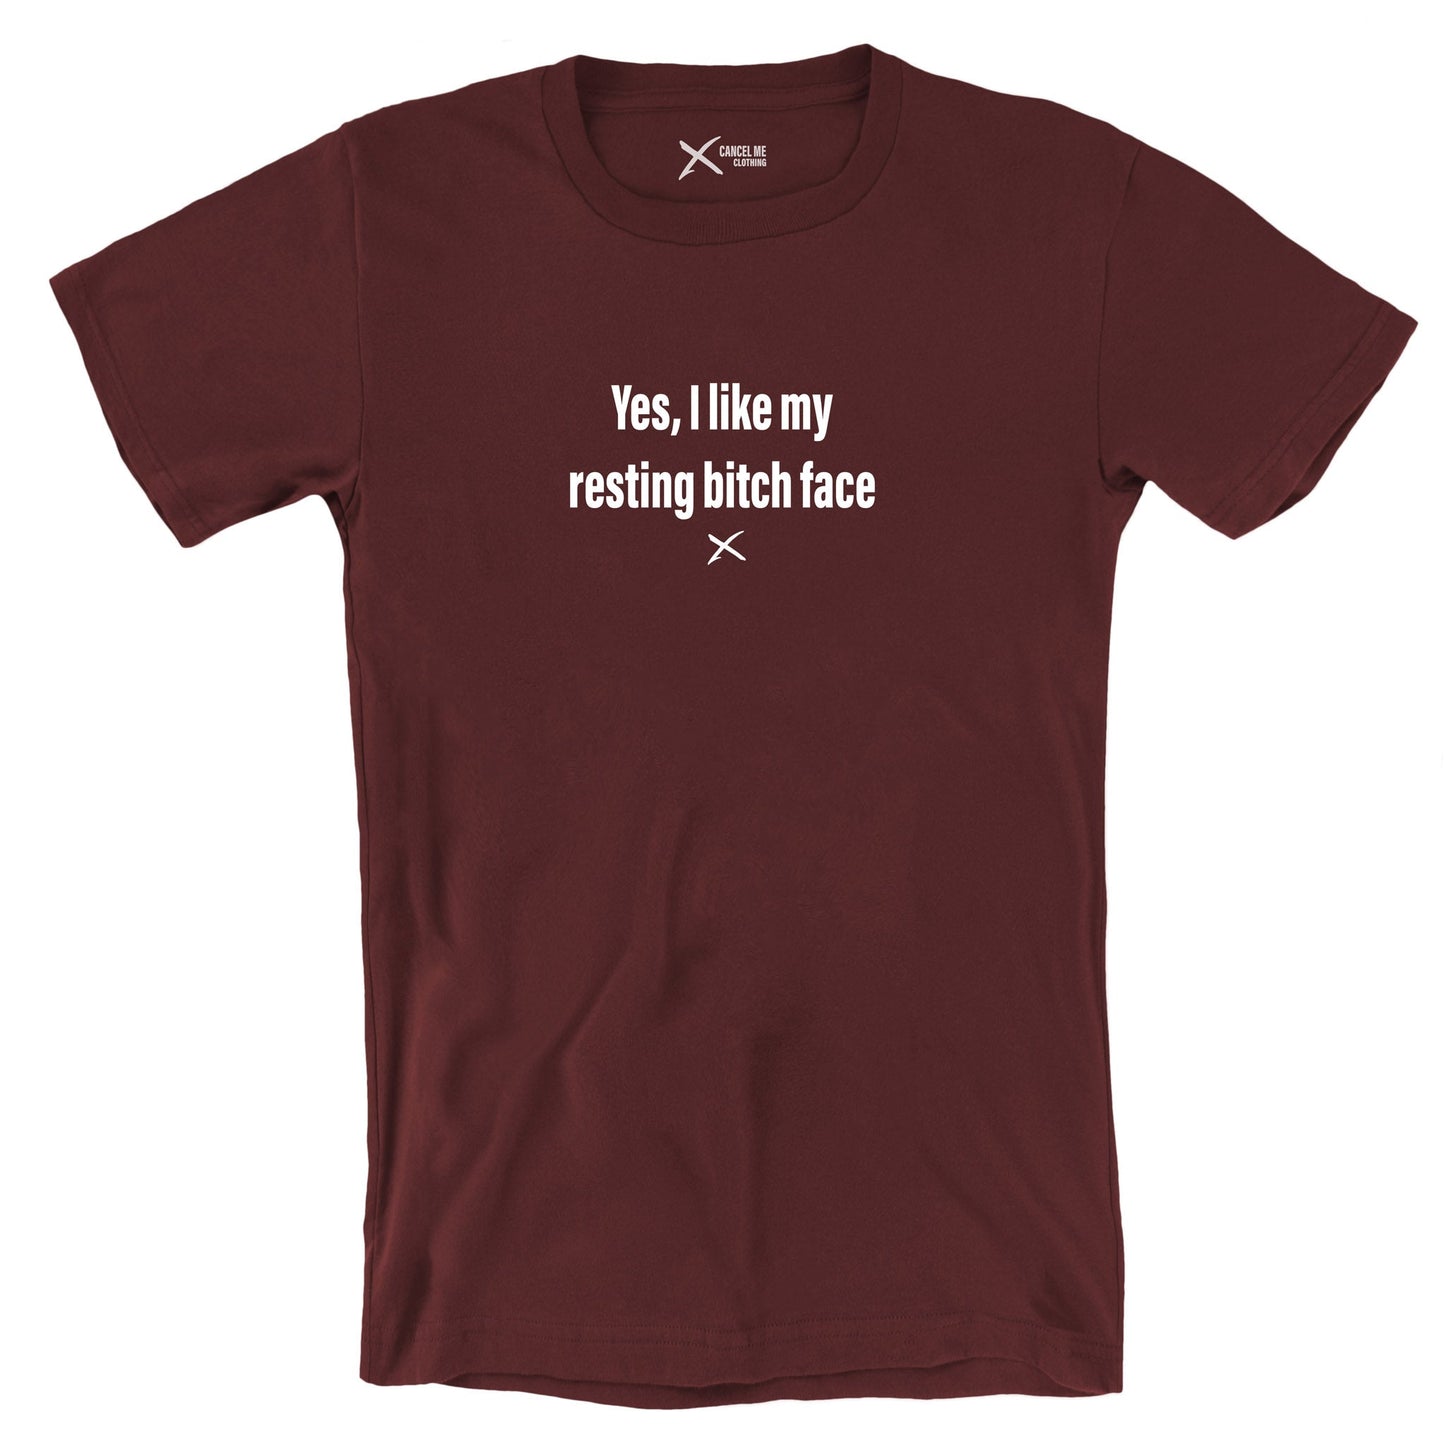 Yes, I like my resting bitch face - Shirt